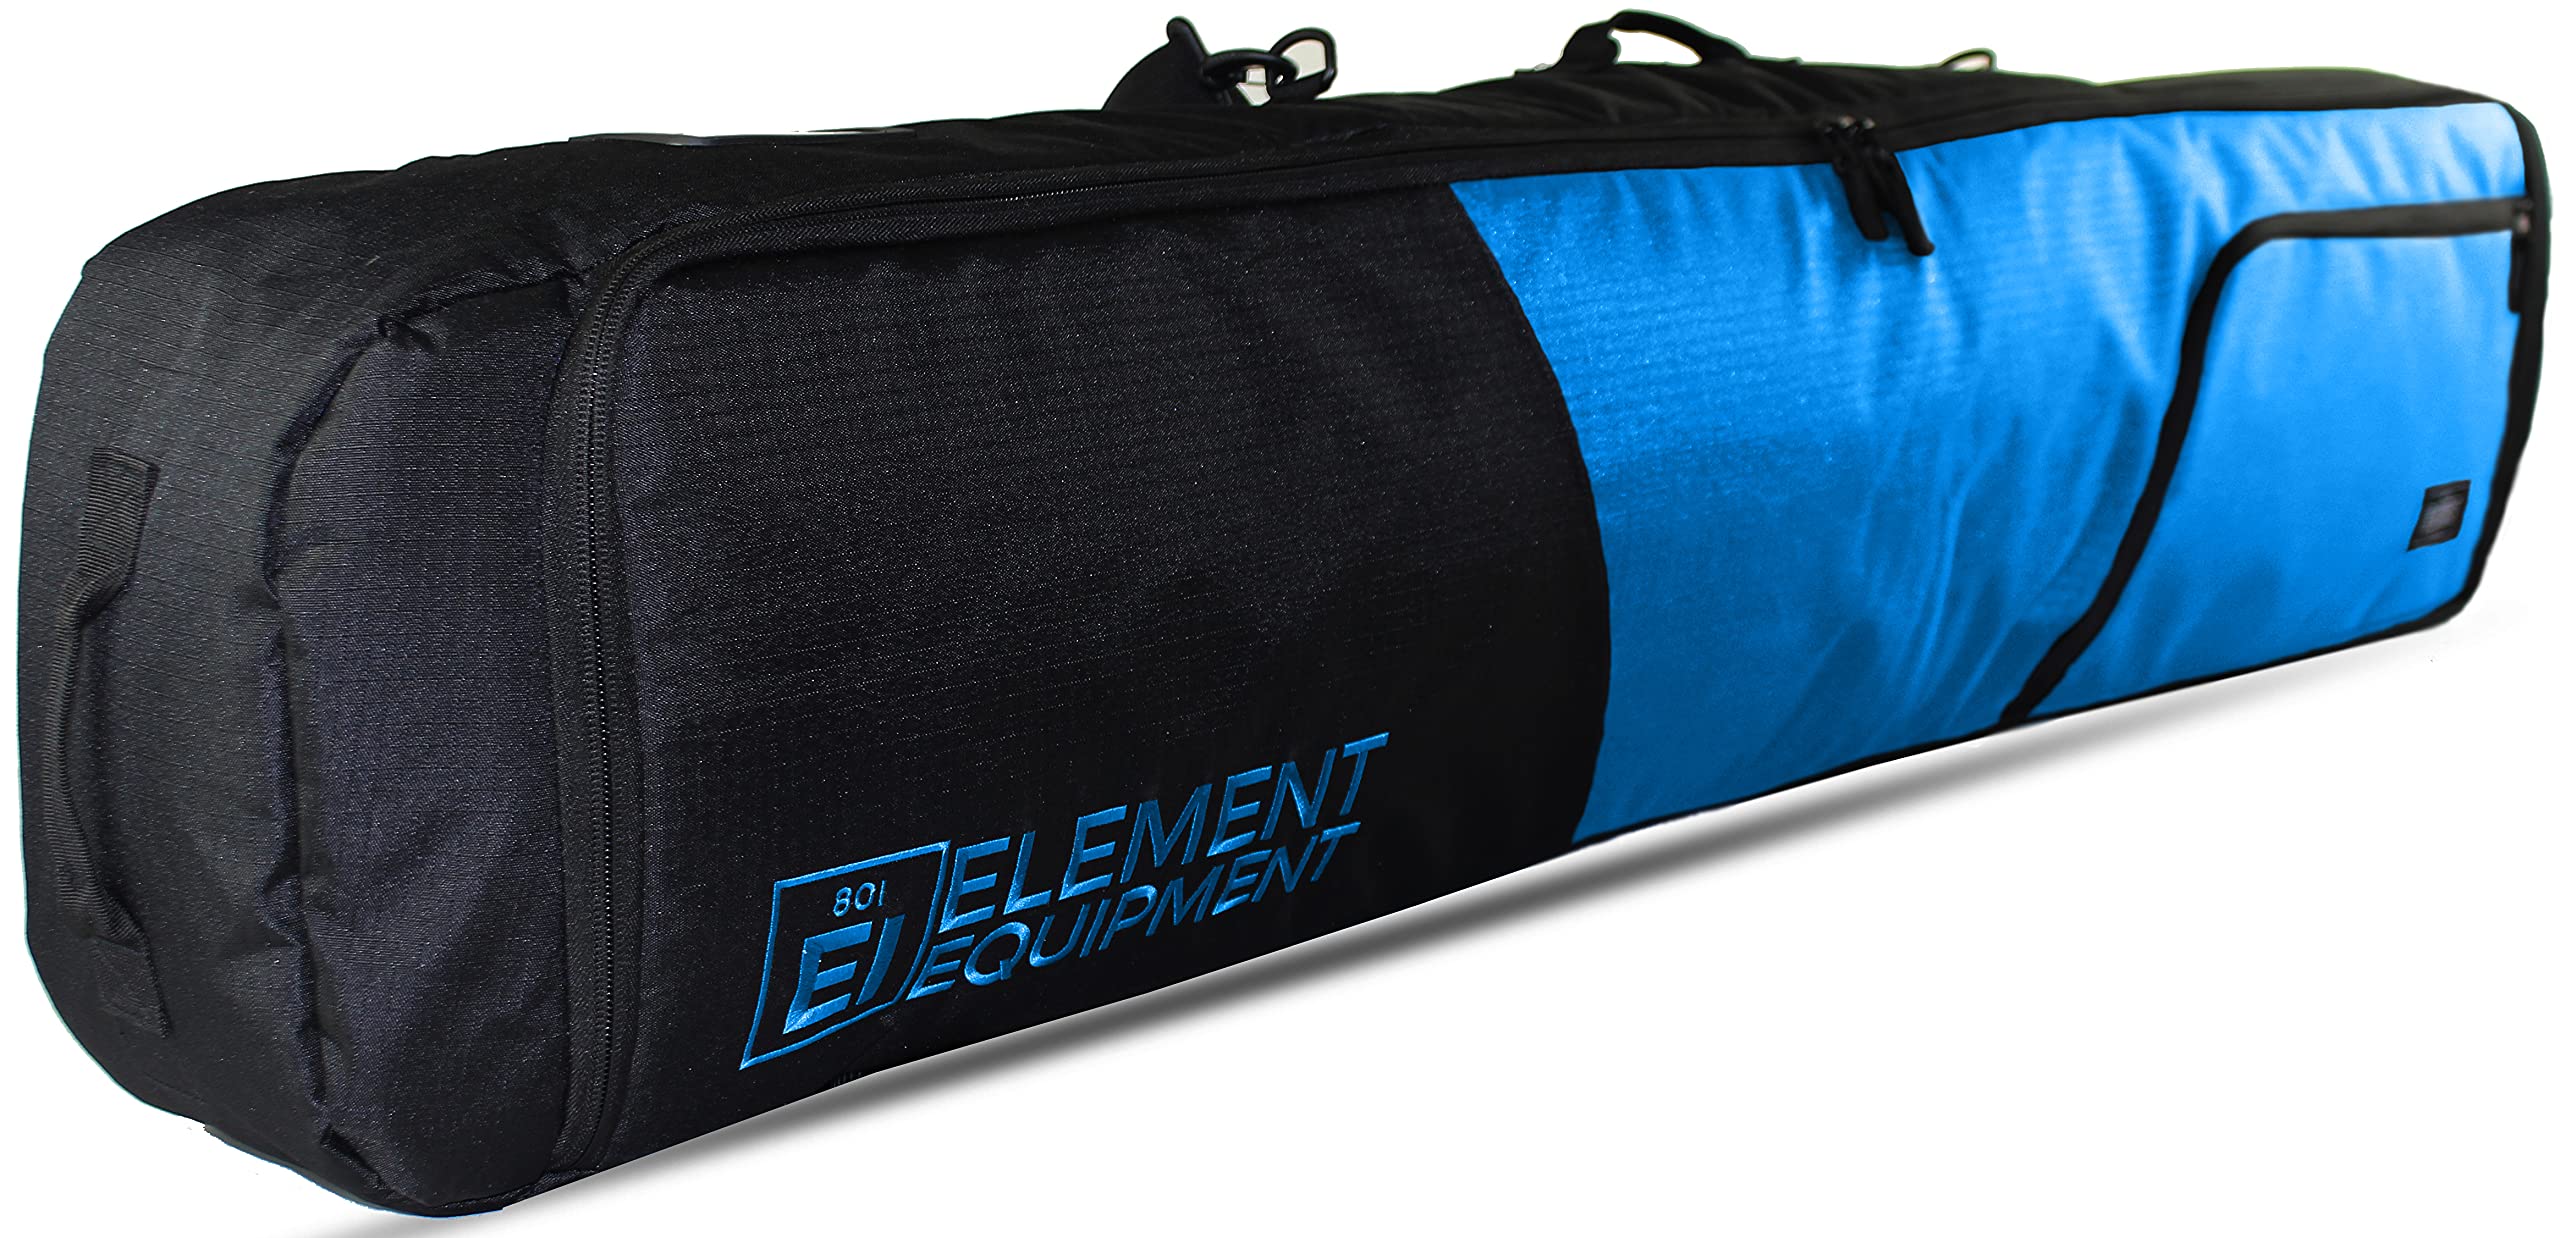 Element Equipment Deluxe Padded Snowboard Bag - Premium High End Travel Bag Blue Ripstop 165